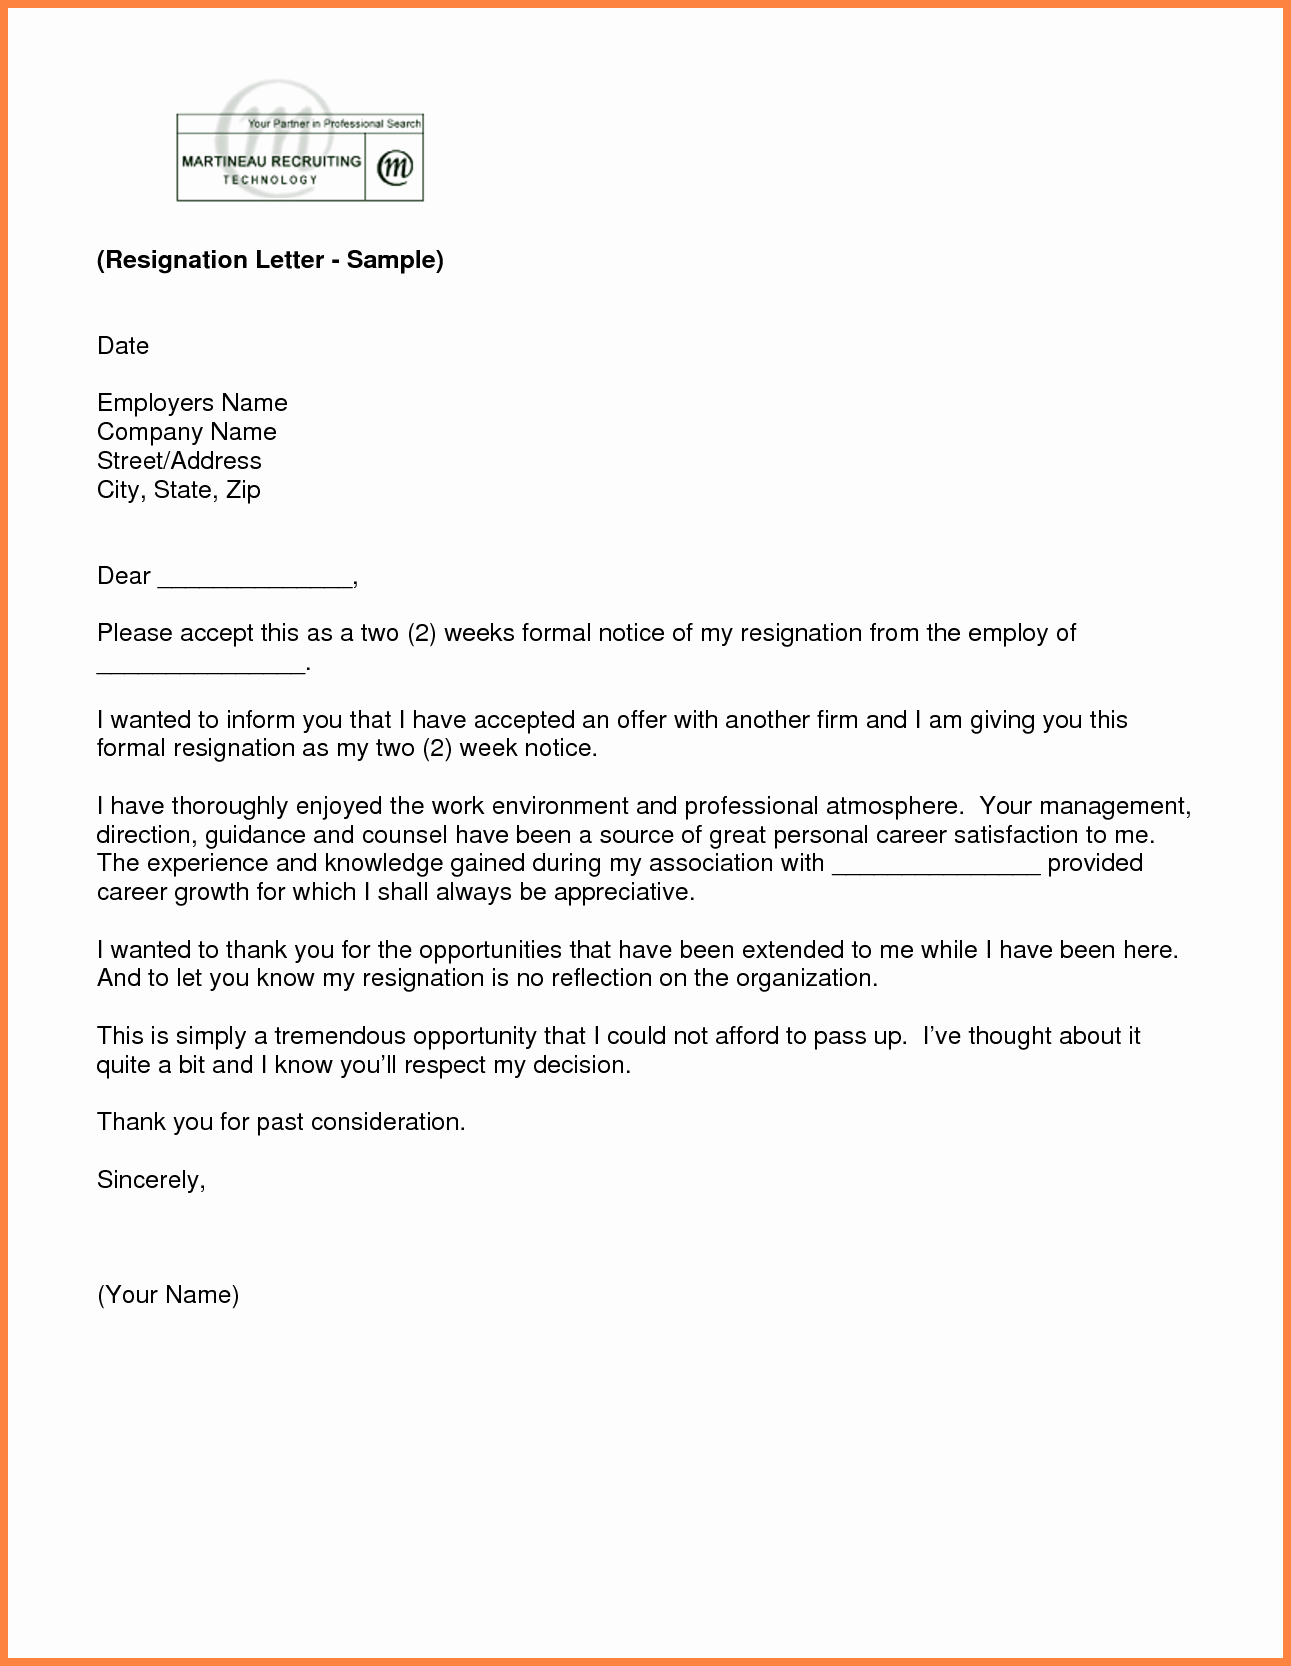 Two Weeks Notice Template Retail New 9 2 Weeks Notice Letter Sample Retail